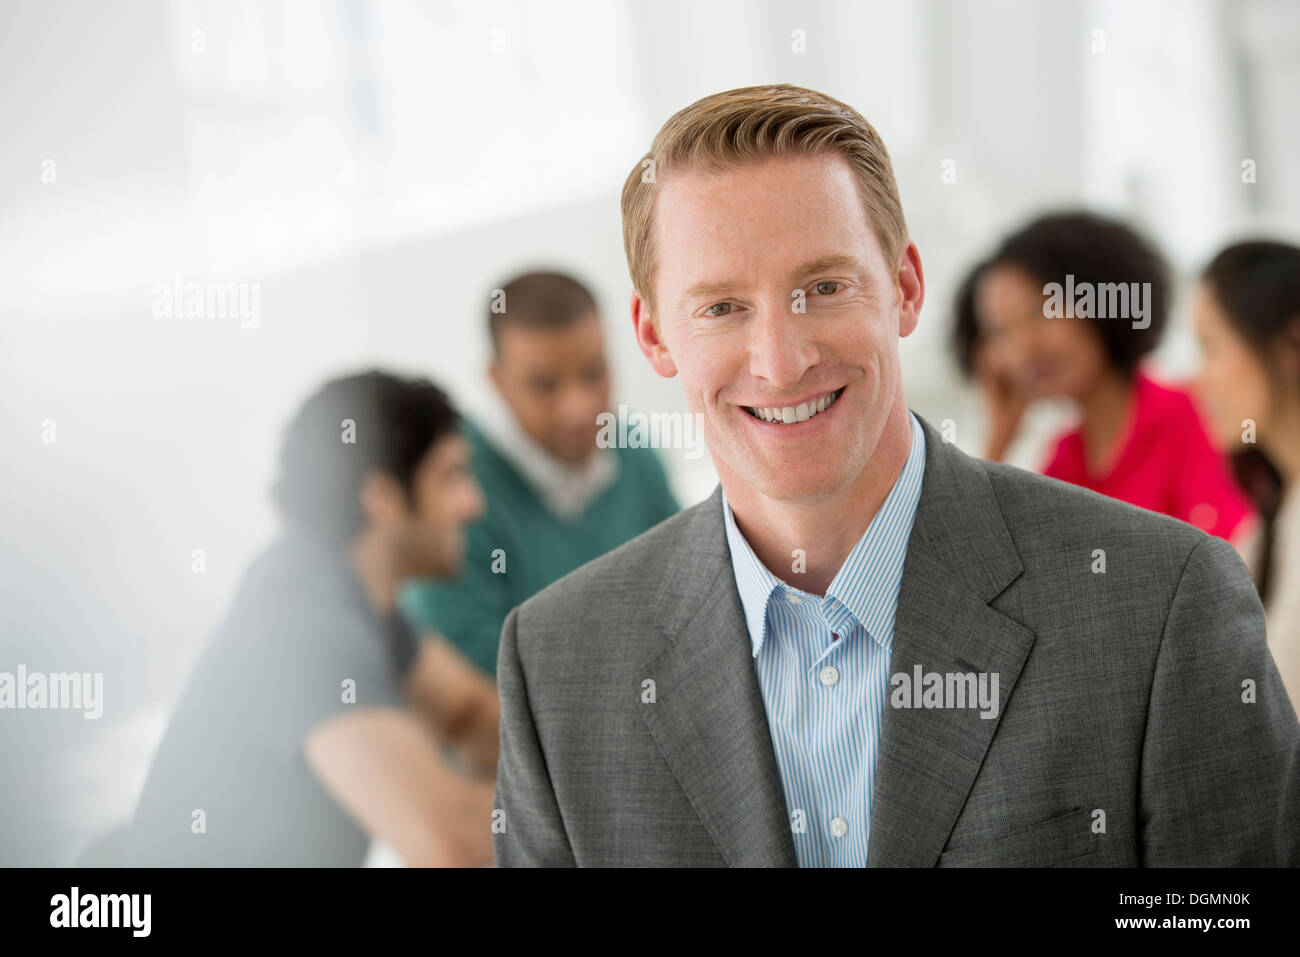 Business meeting. A man smiling confidently. Stock Photo